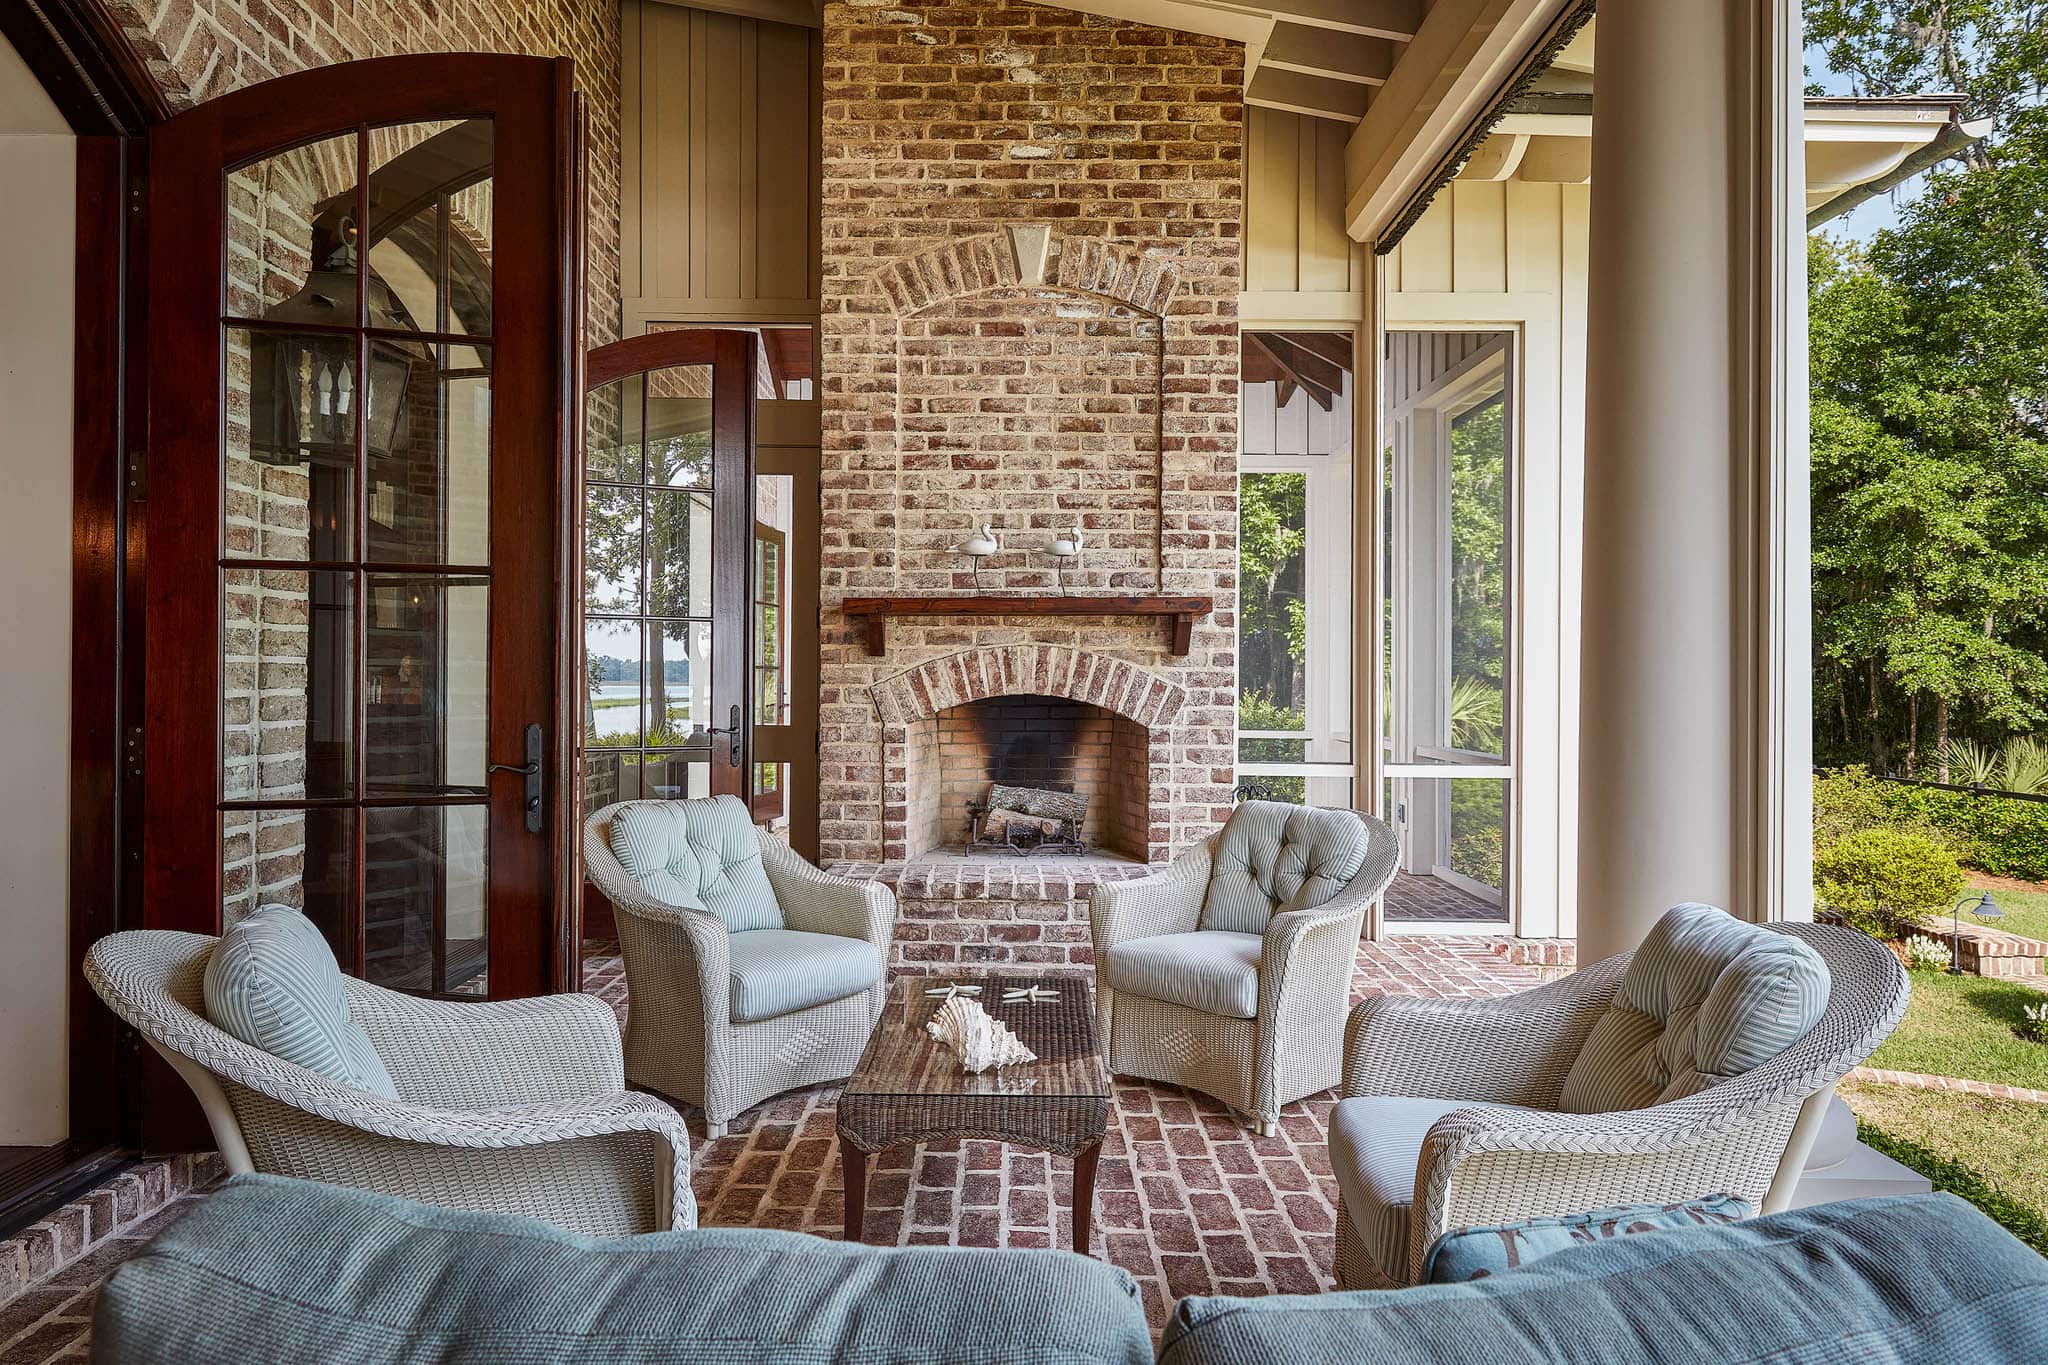 Outdoor porch and seating area with fireplace